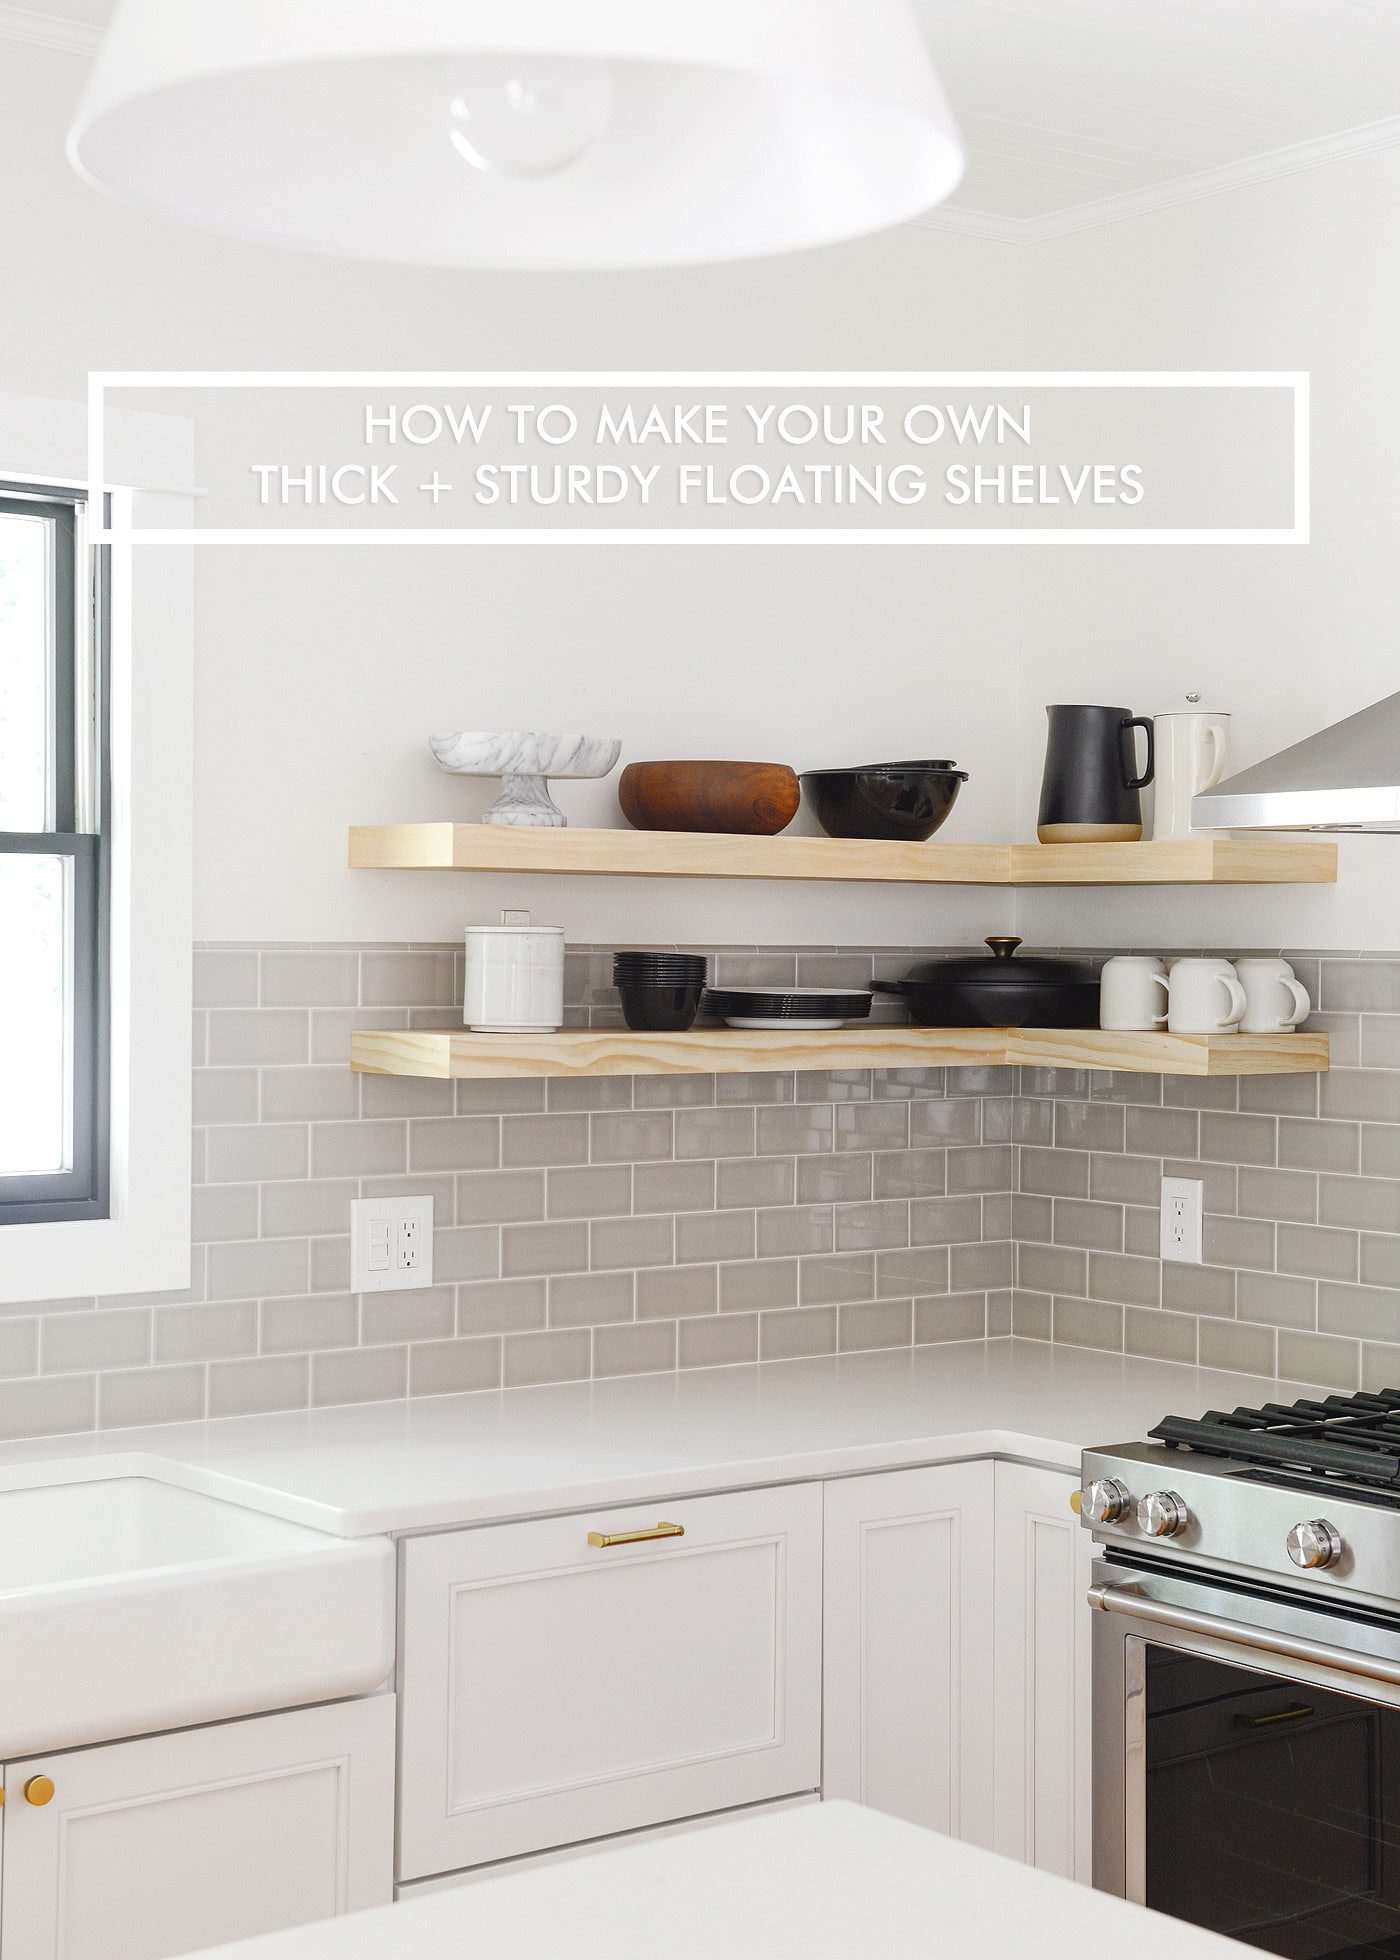 Make your own thick and sturdy floating shelves // video tutorial! // via Yellow Brick Home